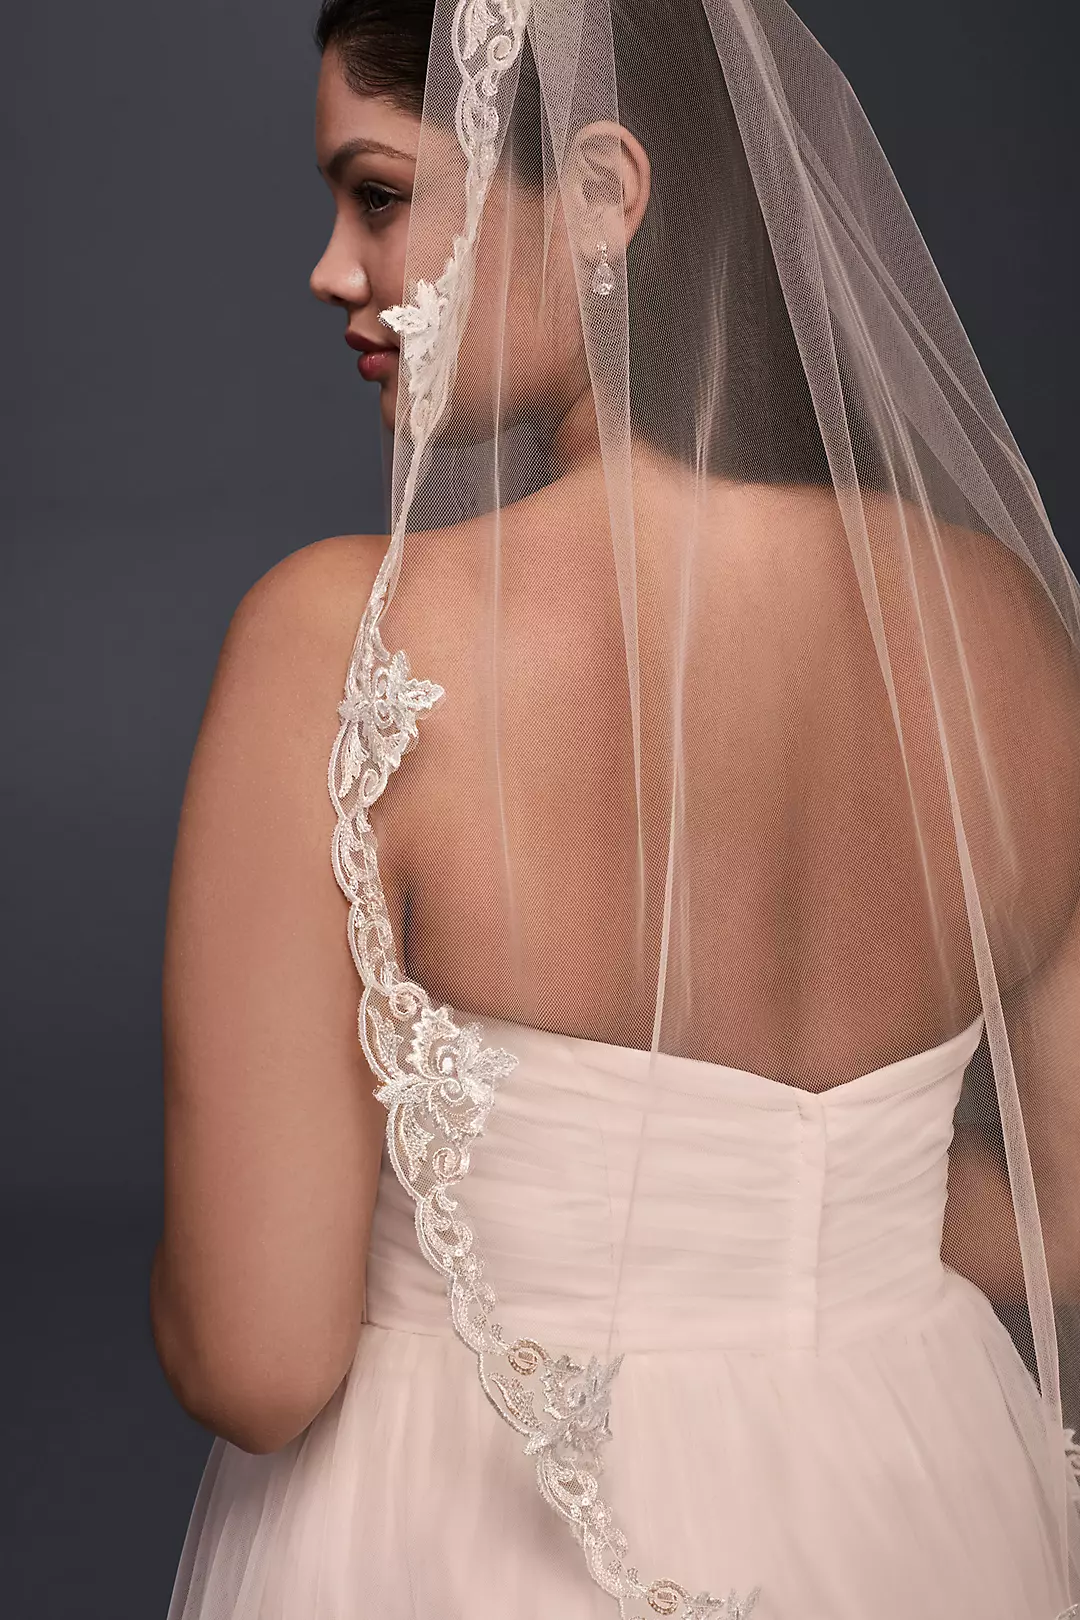 Lace-Edged Whisper Pink Elbow Veil Image